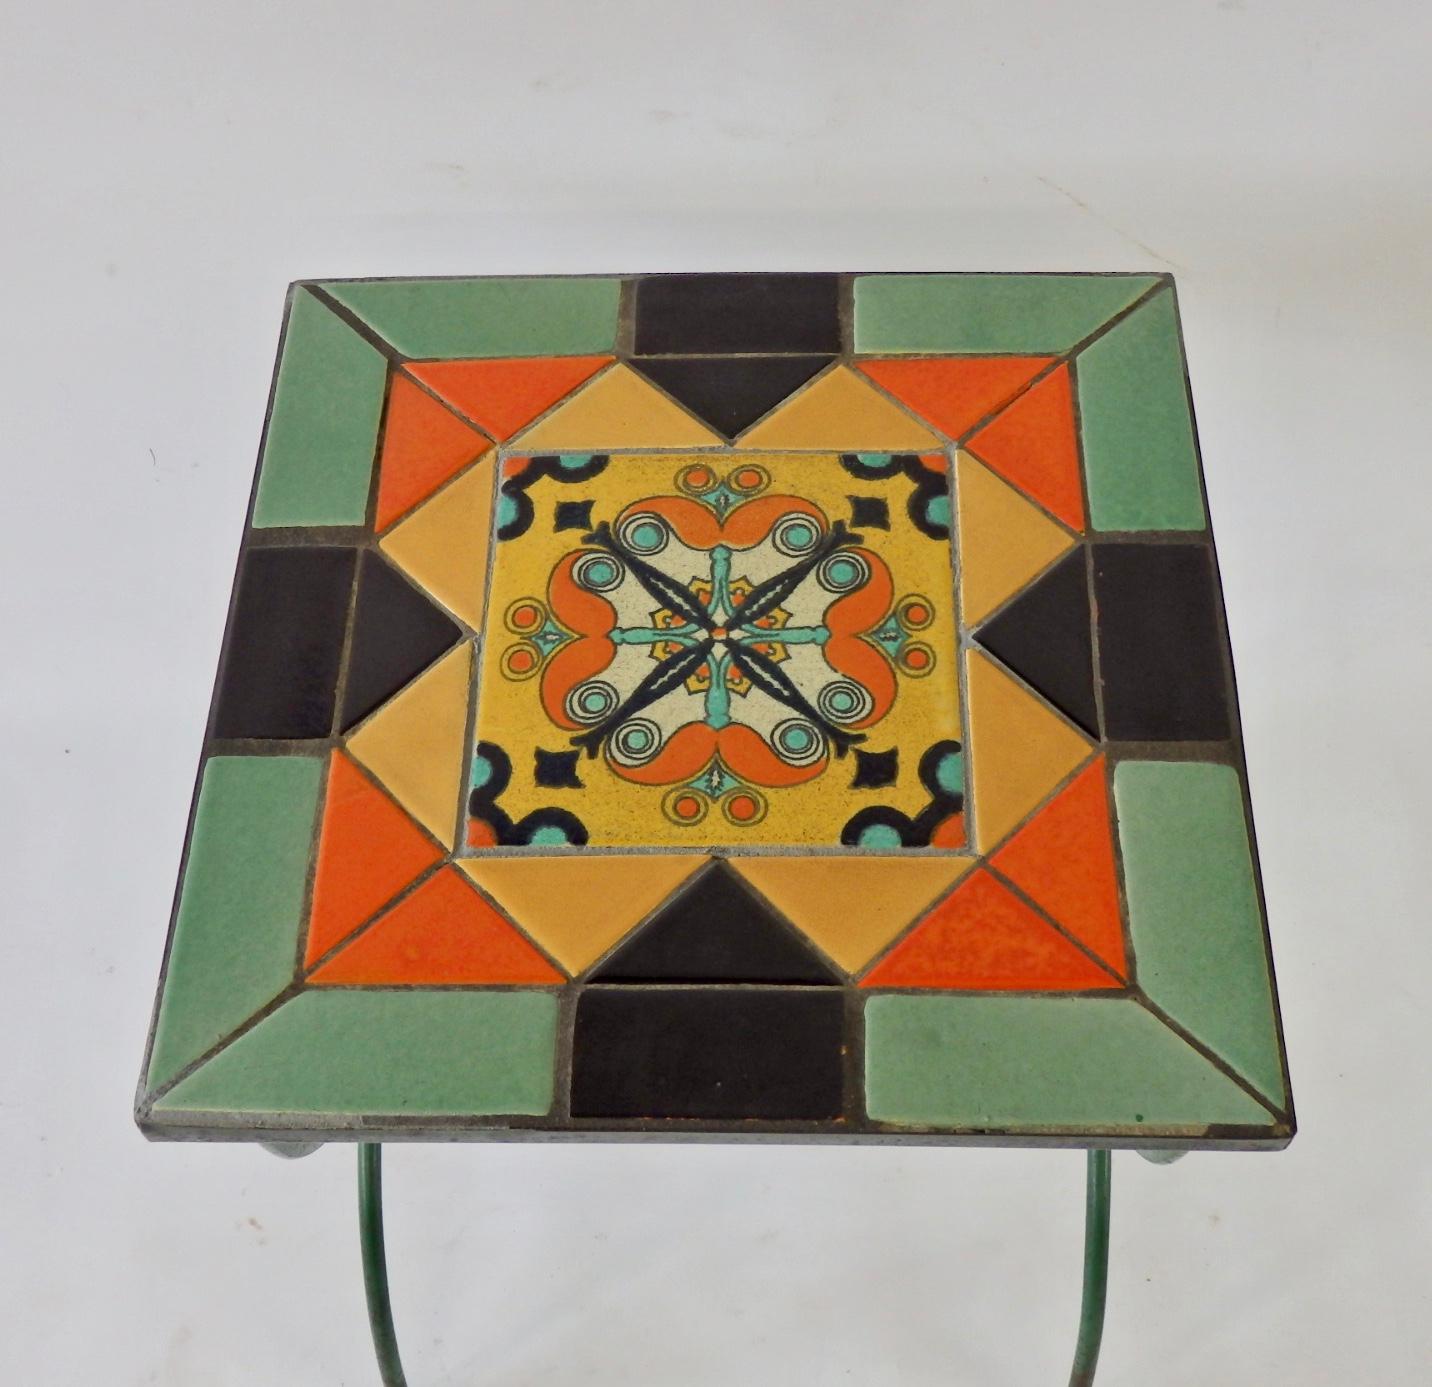 Beautifully colored California tile top table set into wrought iron base. Base in original green paint. Paint is worn.